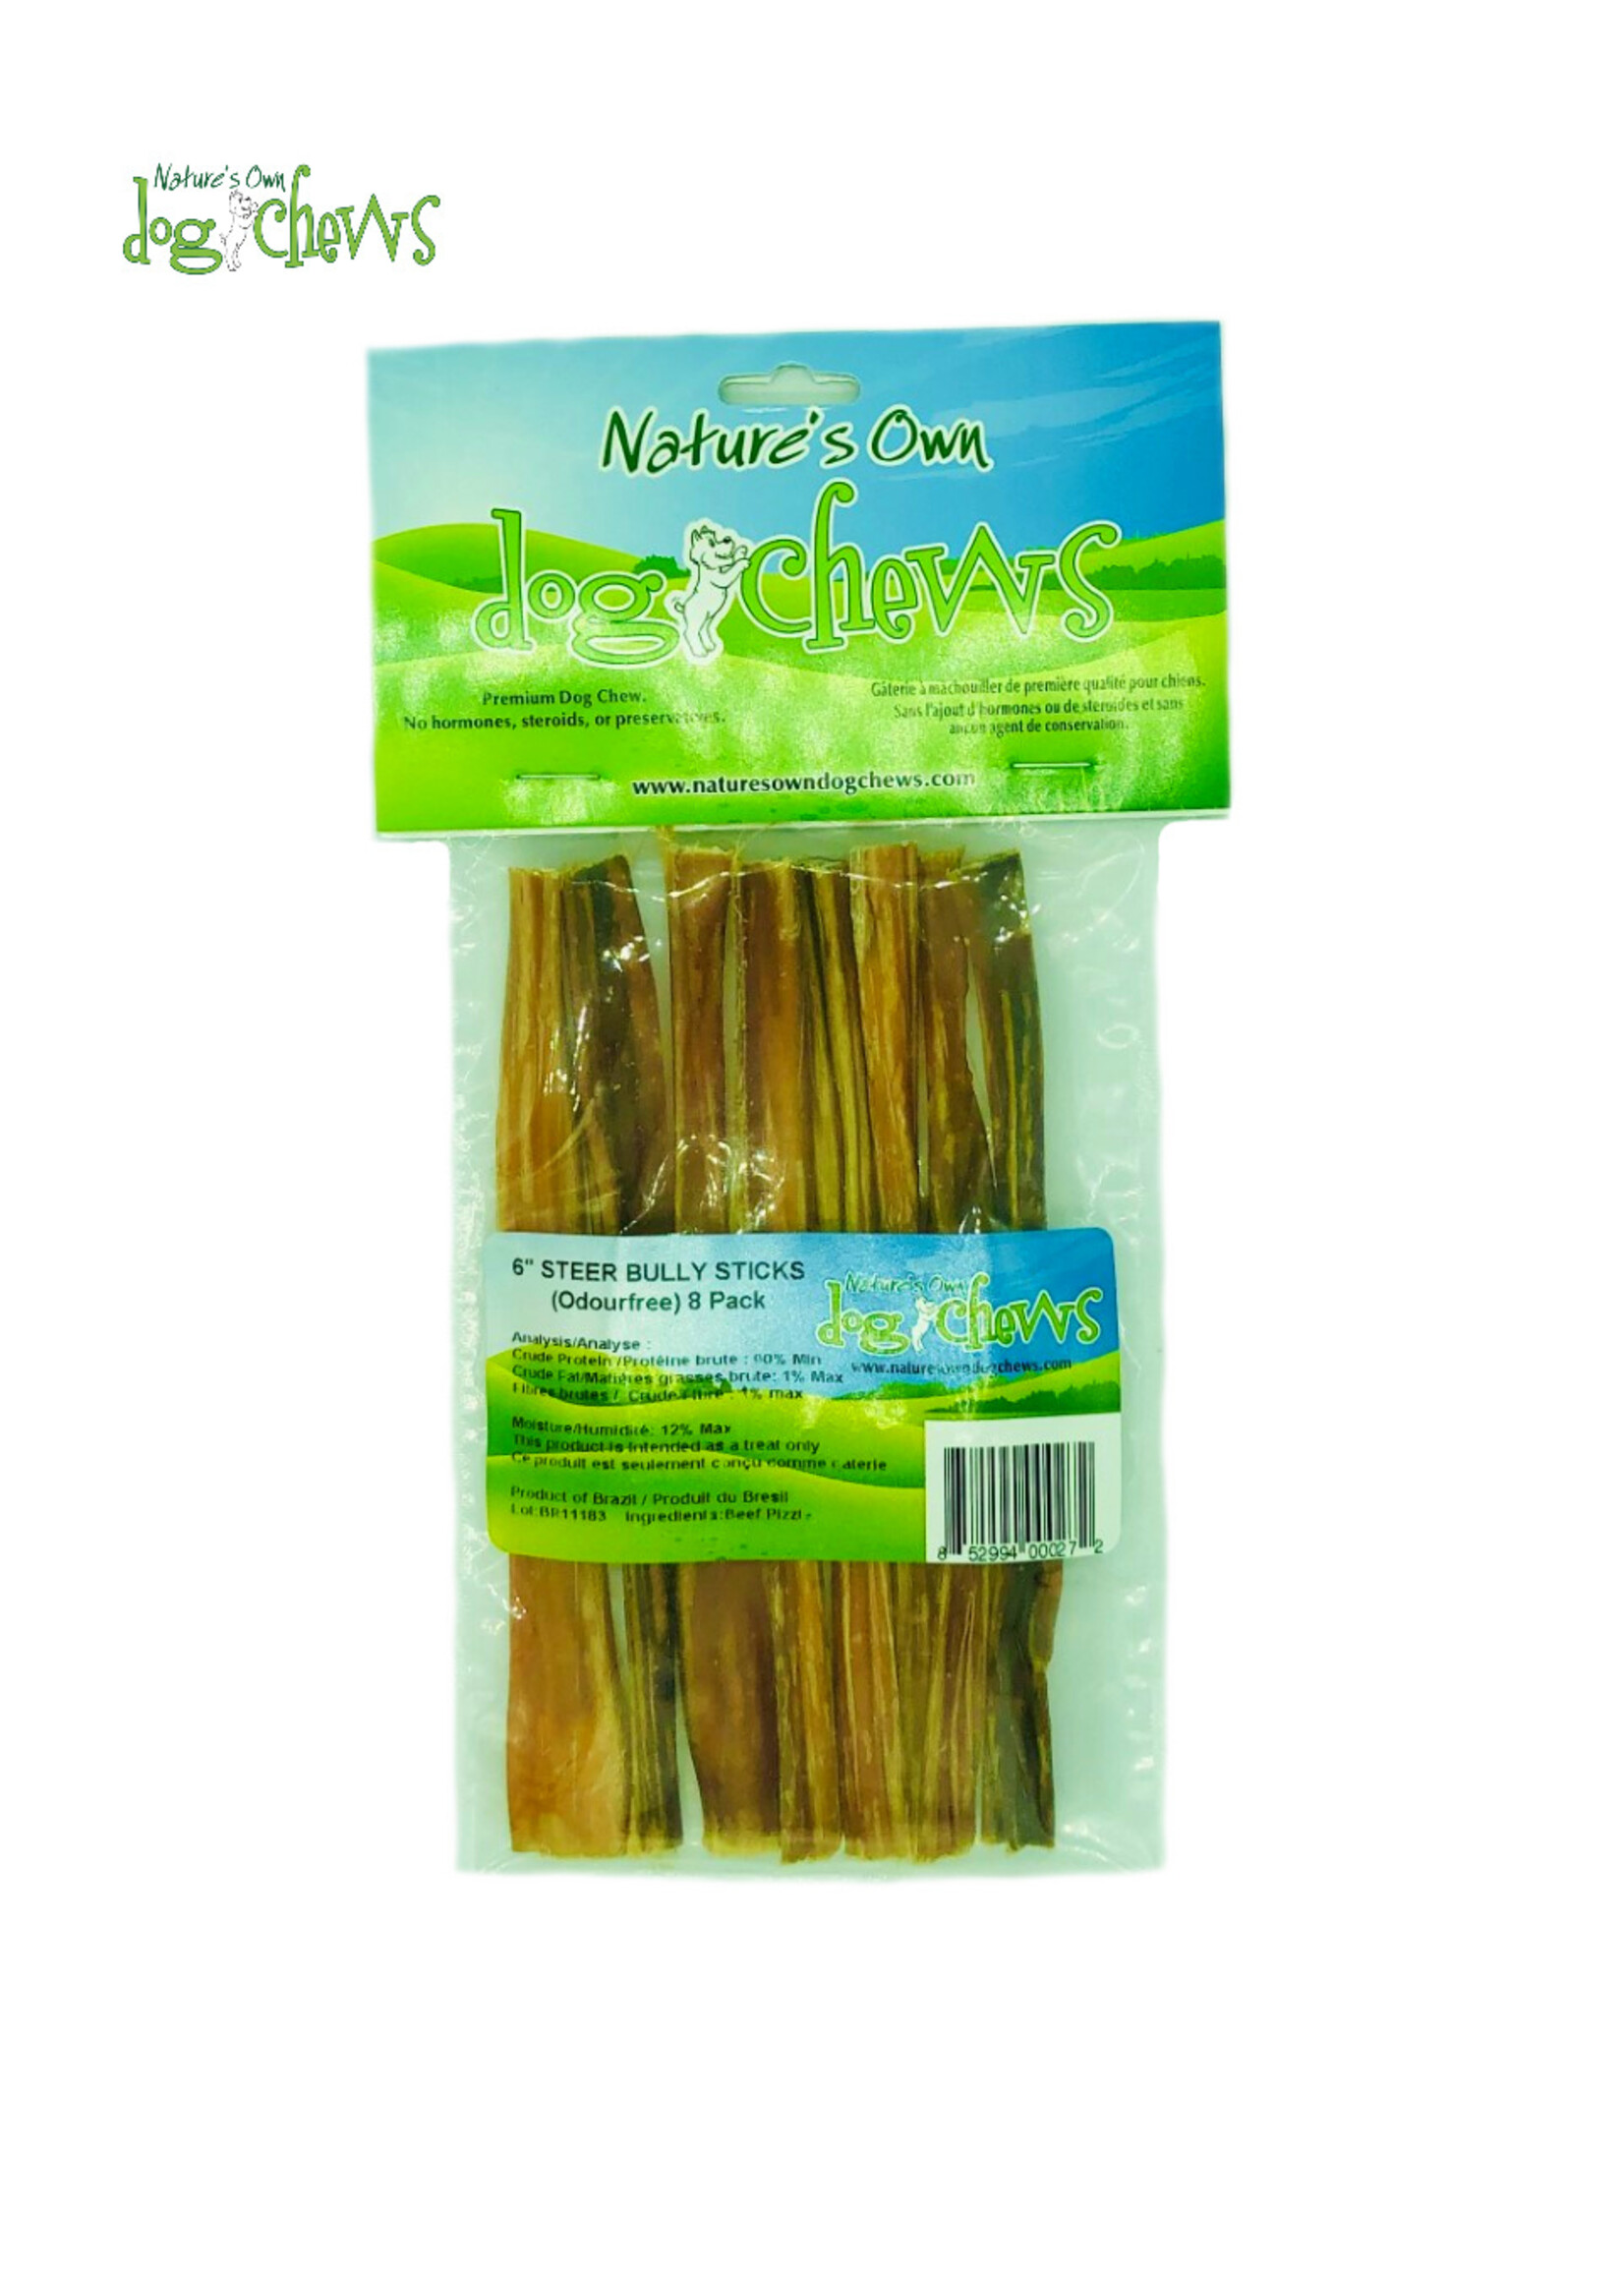 Nature's Own Nature's Own Steer Bully Sticks